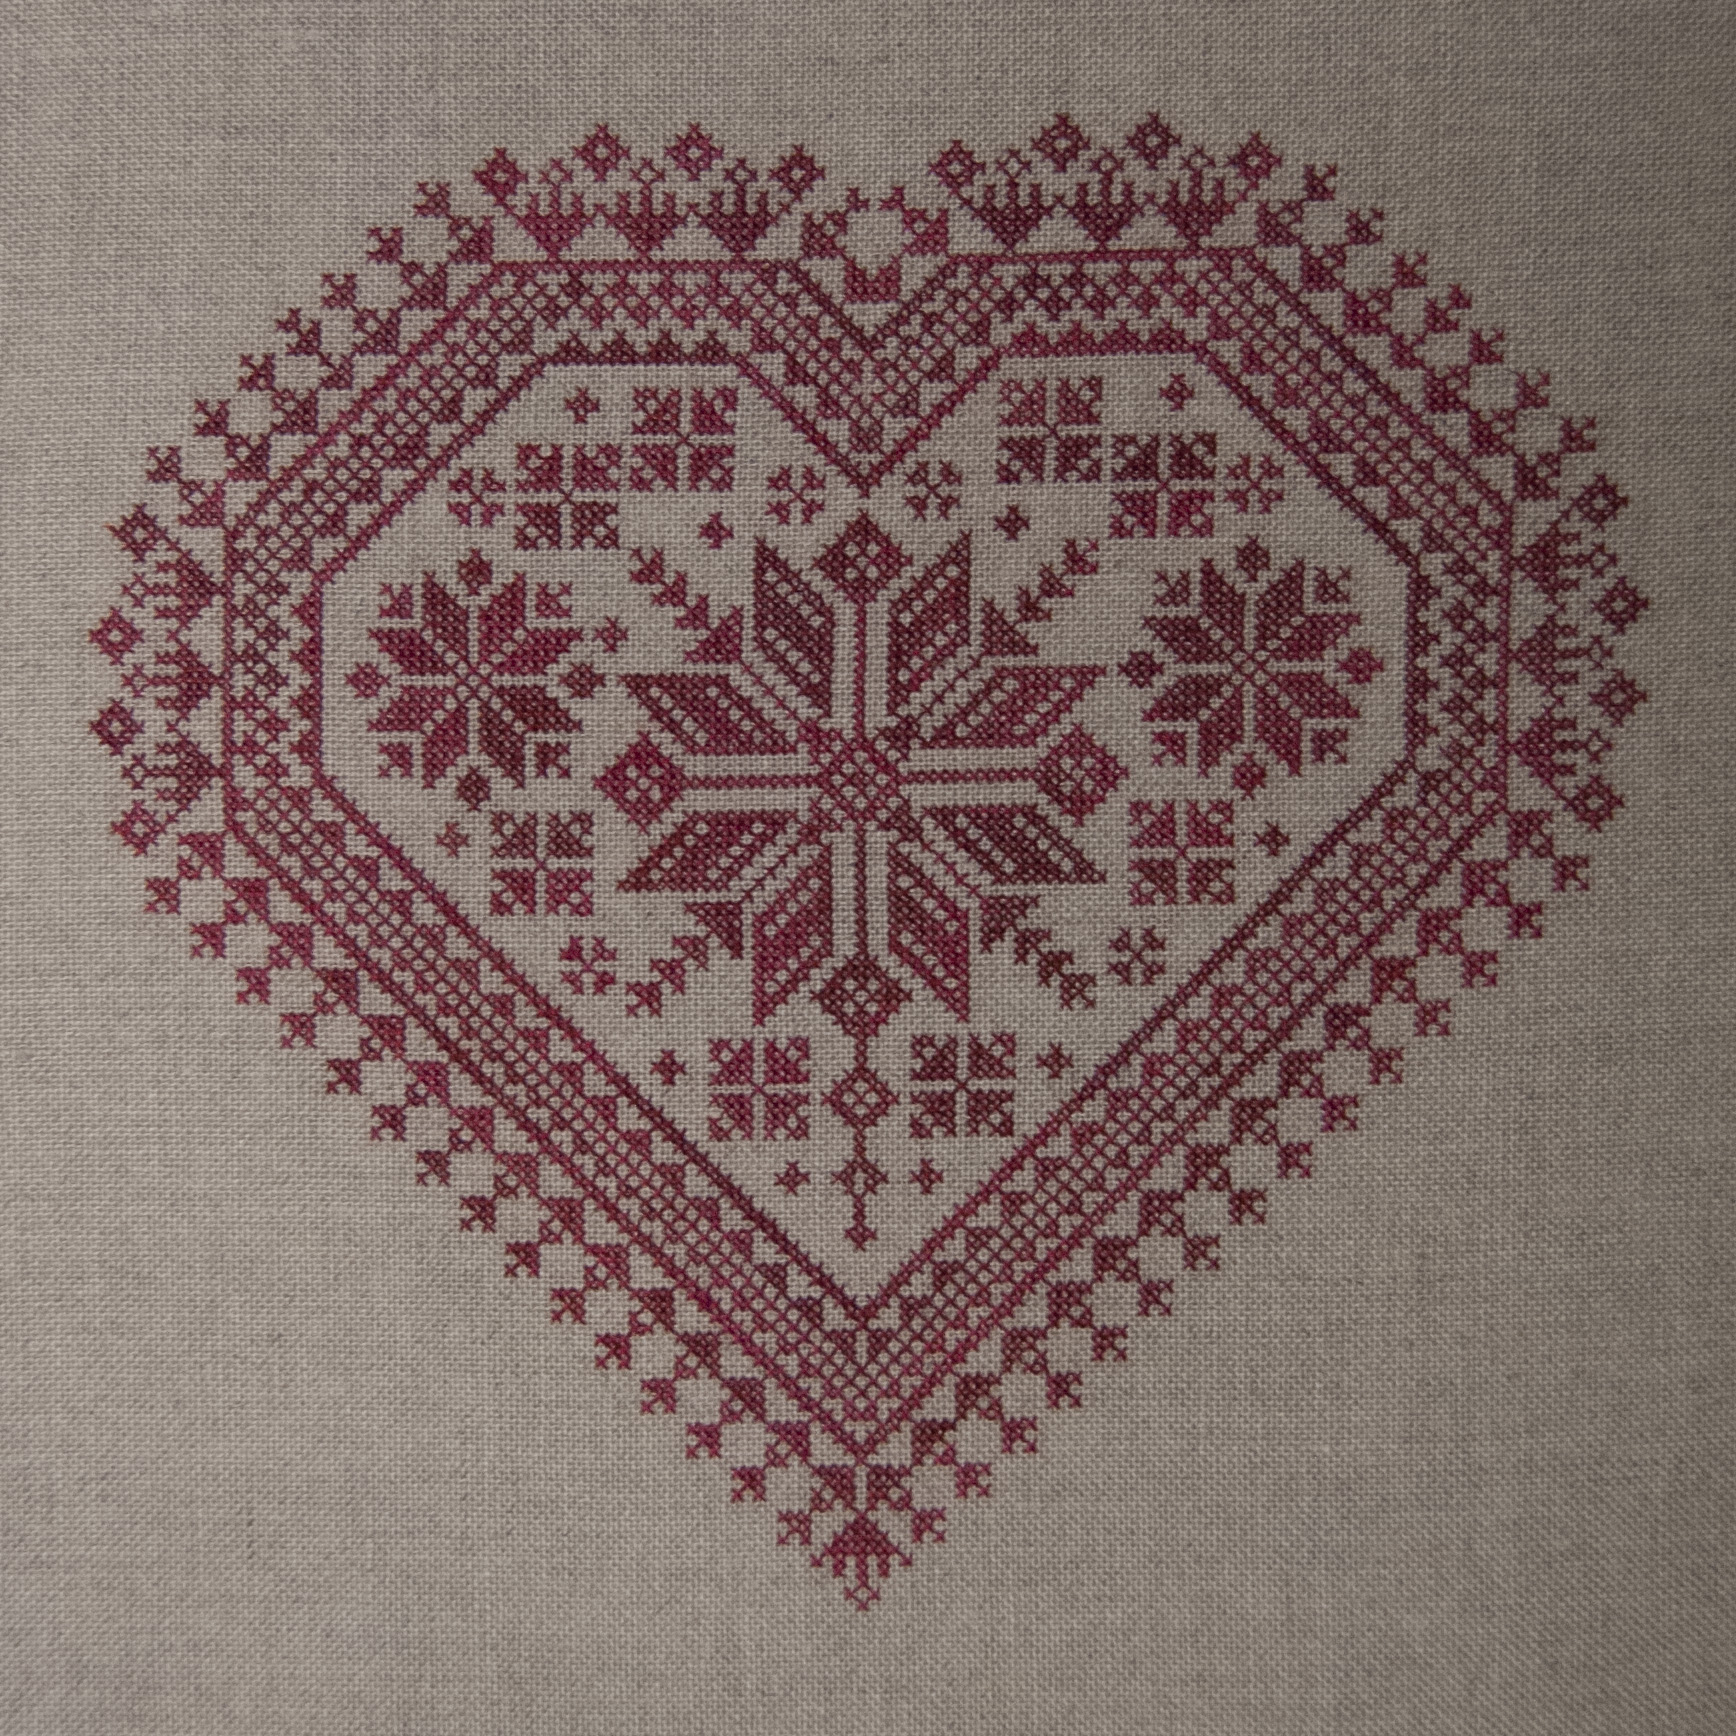 Scandinavian Embroidery Patterns Free The Nordic Heart Modern Folk Embroidery